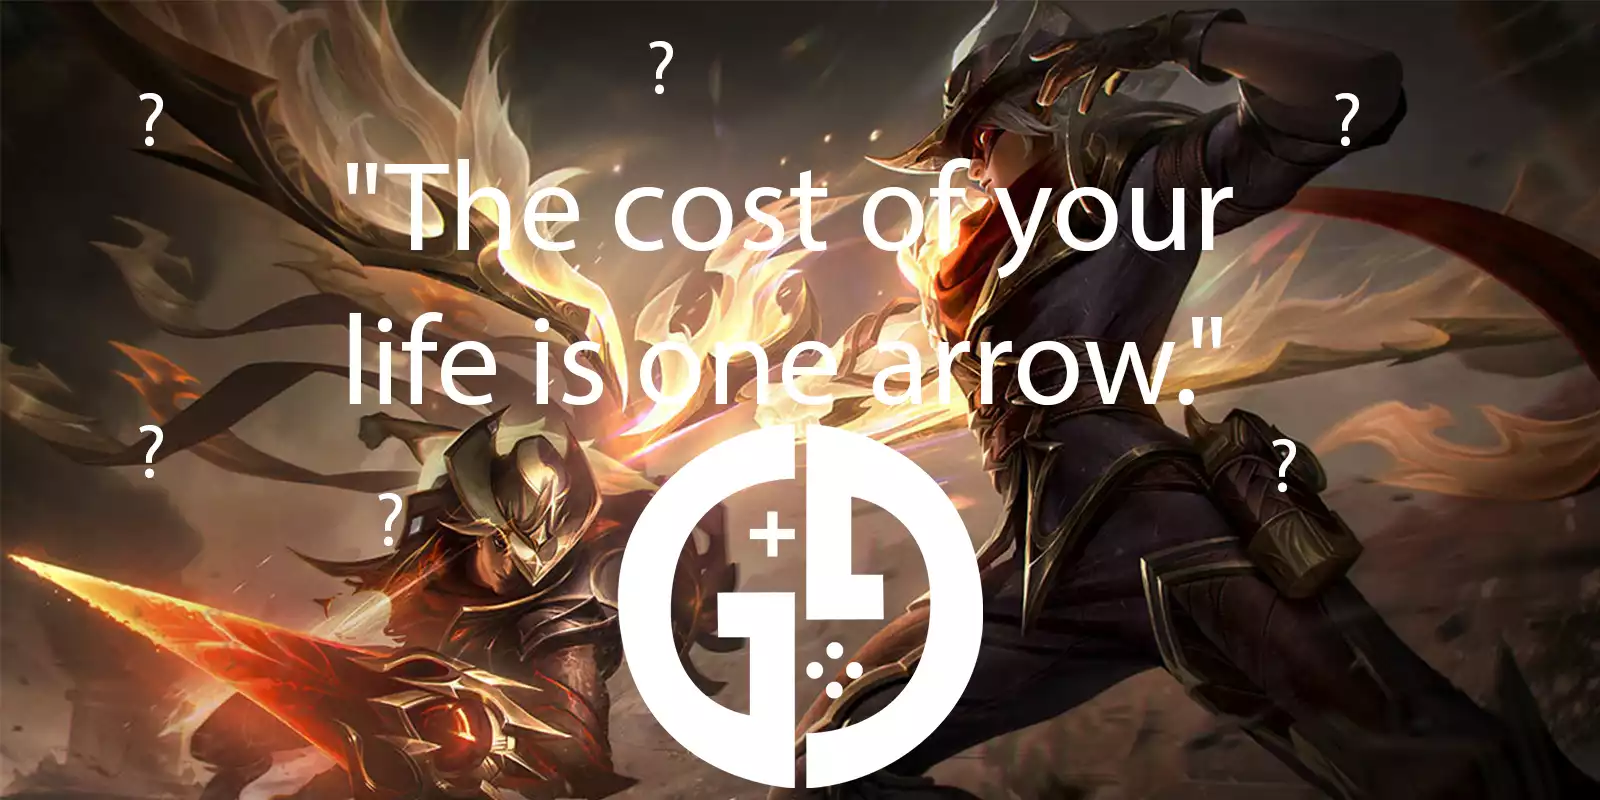 What champion says "The cost of your life is one arrow."?